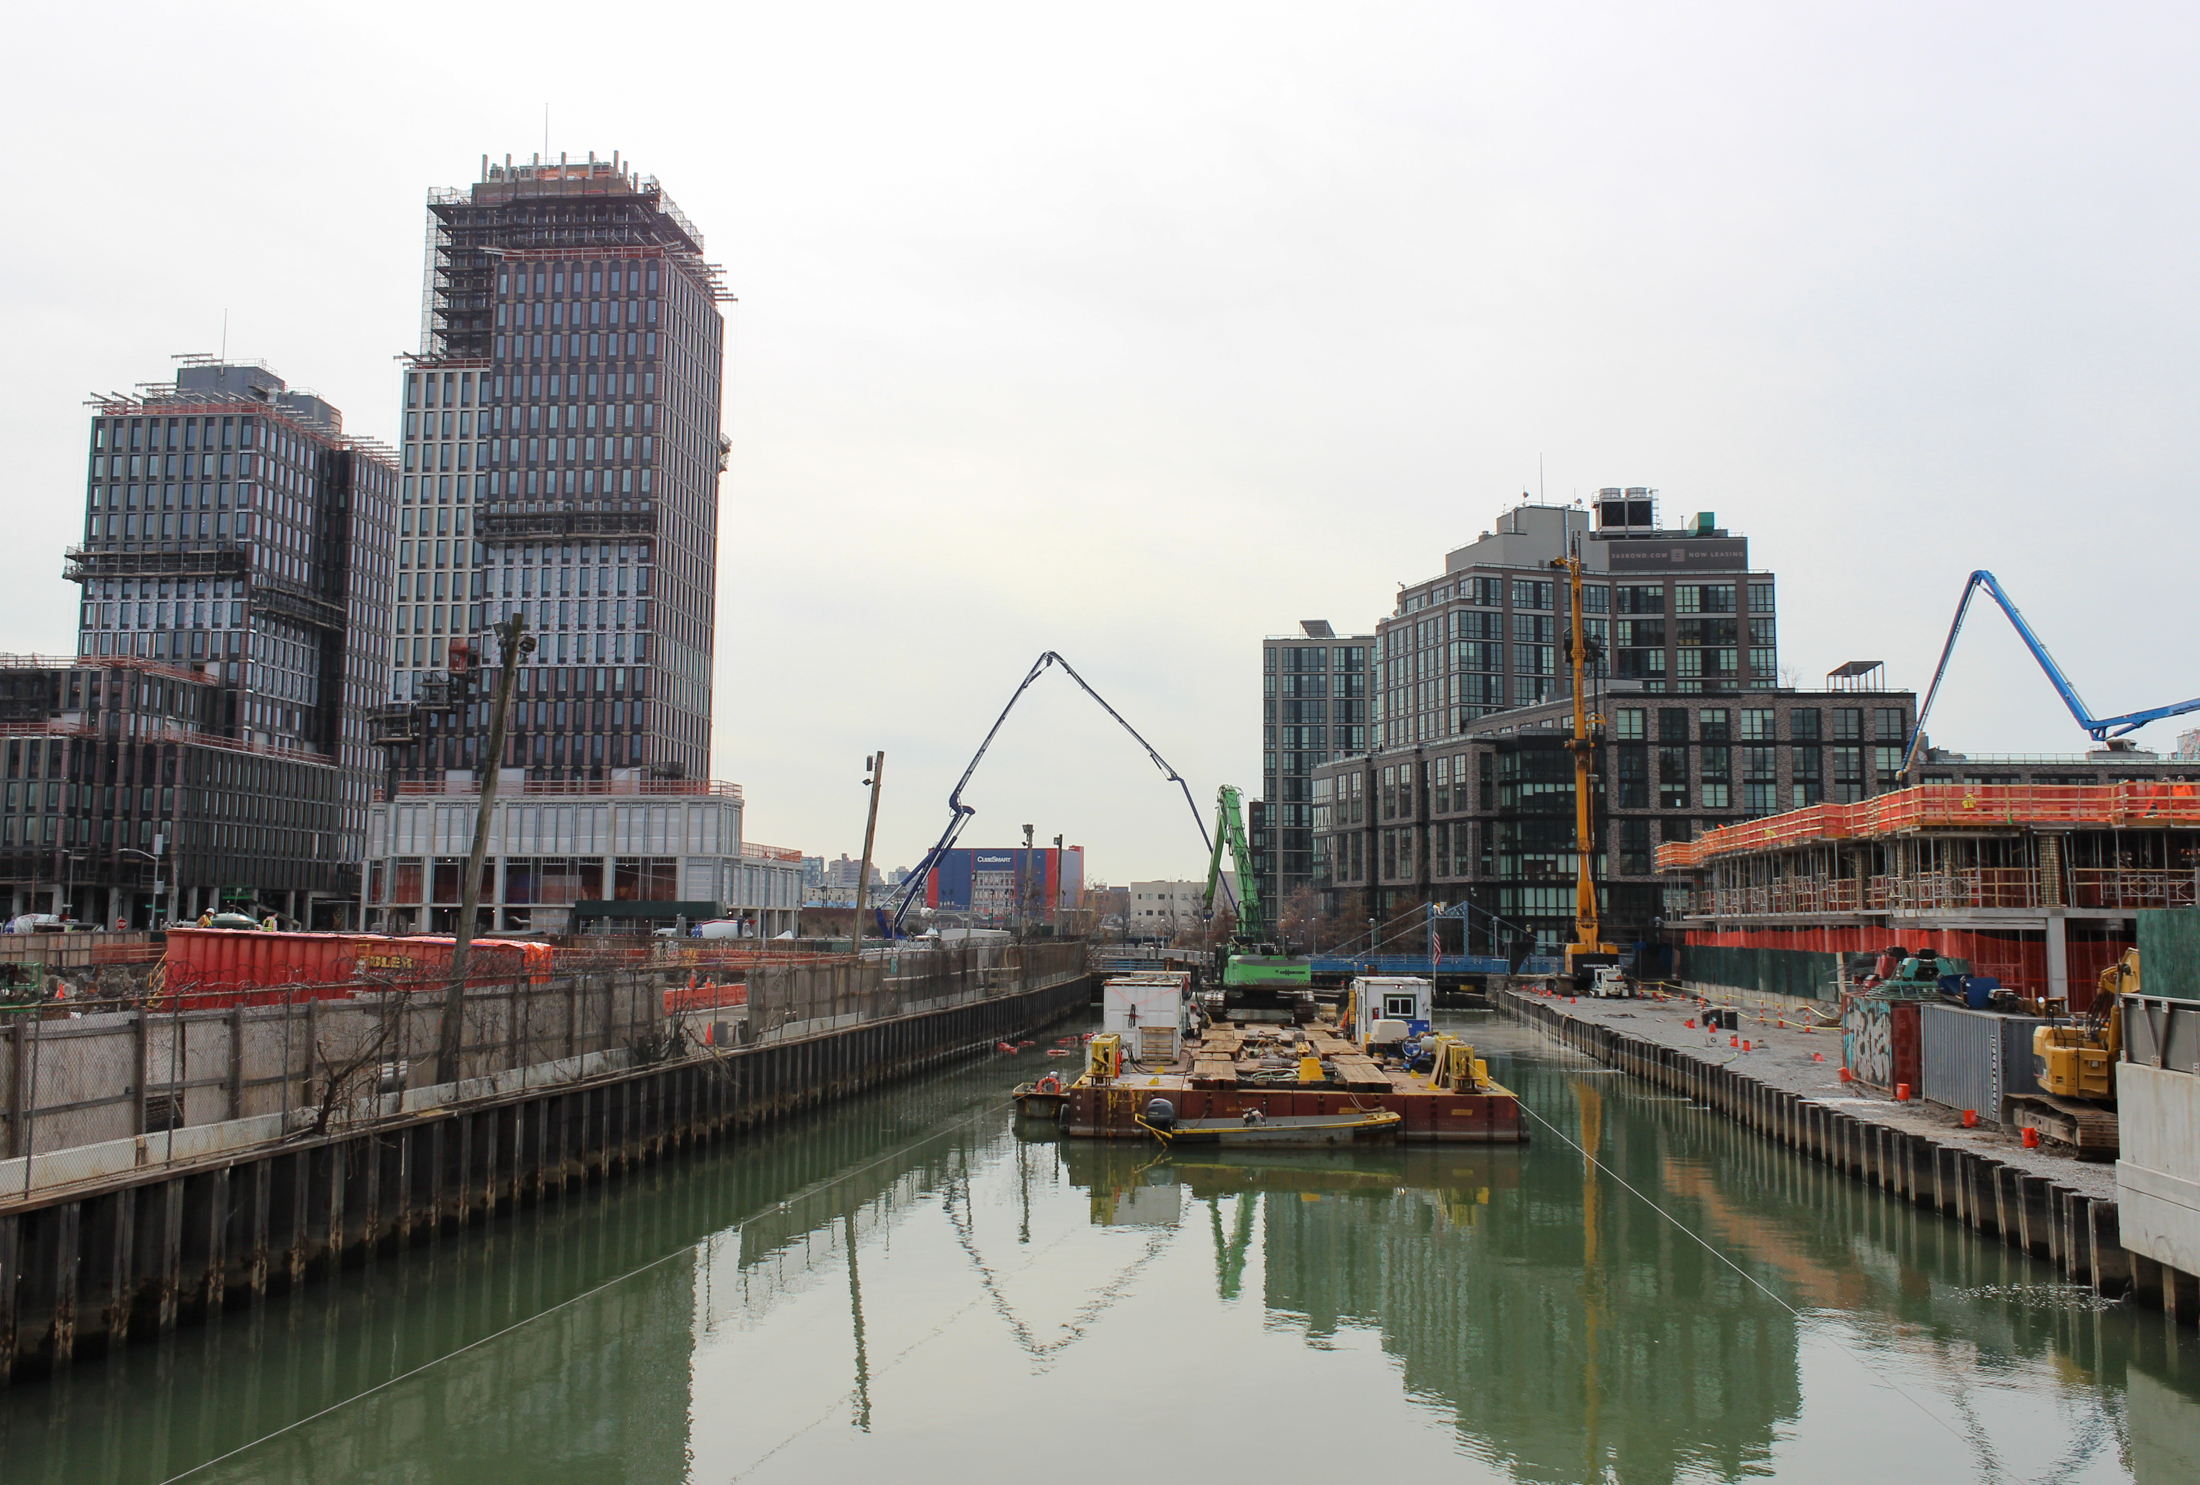 construction rising on the canal